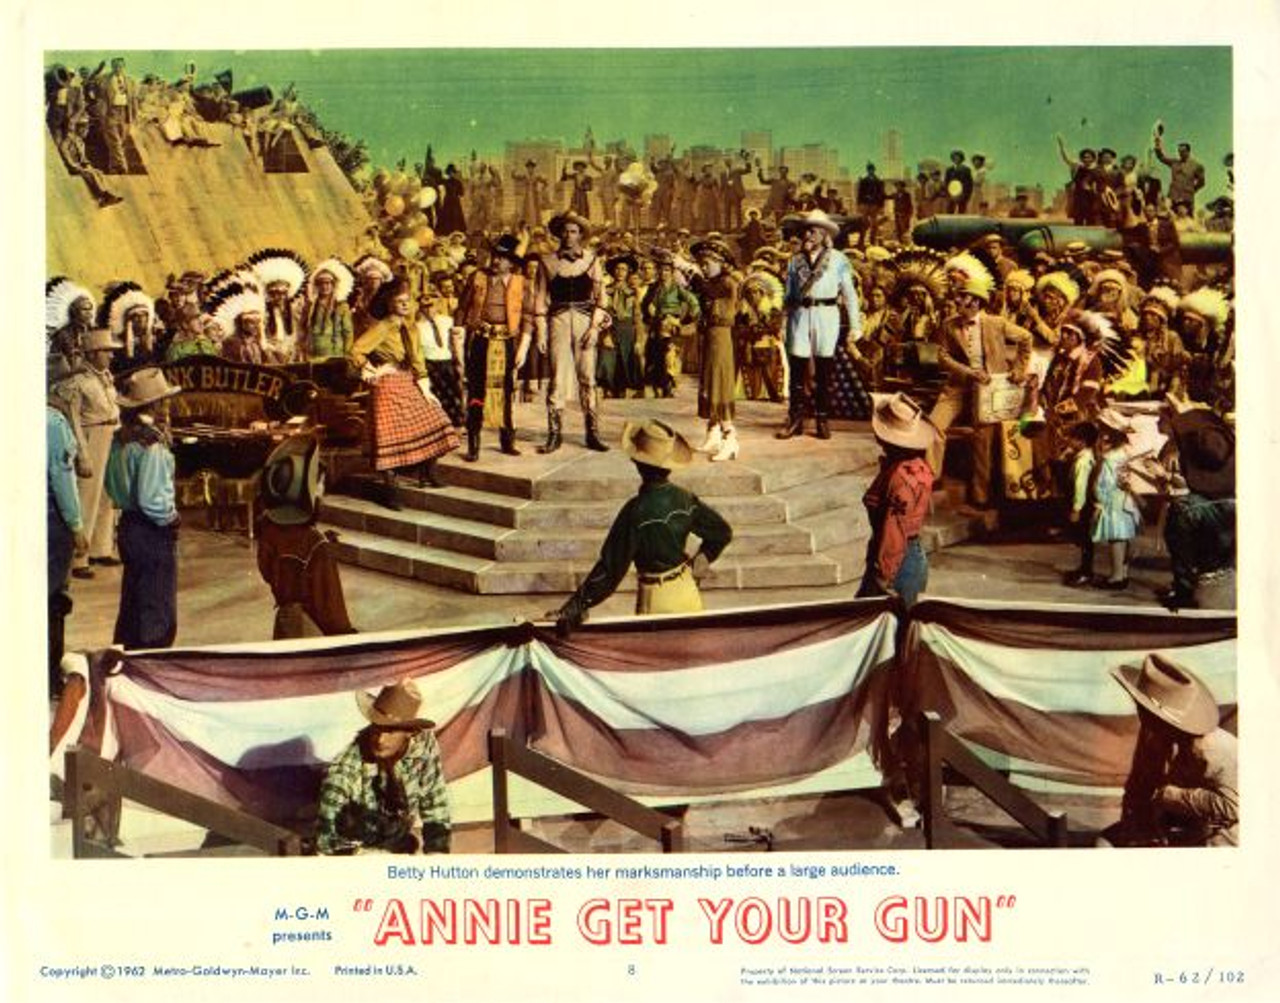 Annie Get Your Gun Lobby Card Starring Betty Hutton (Movie of life of Annie  Oakley and Buffalo Bill's Wild West Show)  | Collect  Stocks and Bonds | Old Stock Certificates